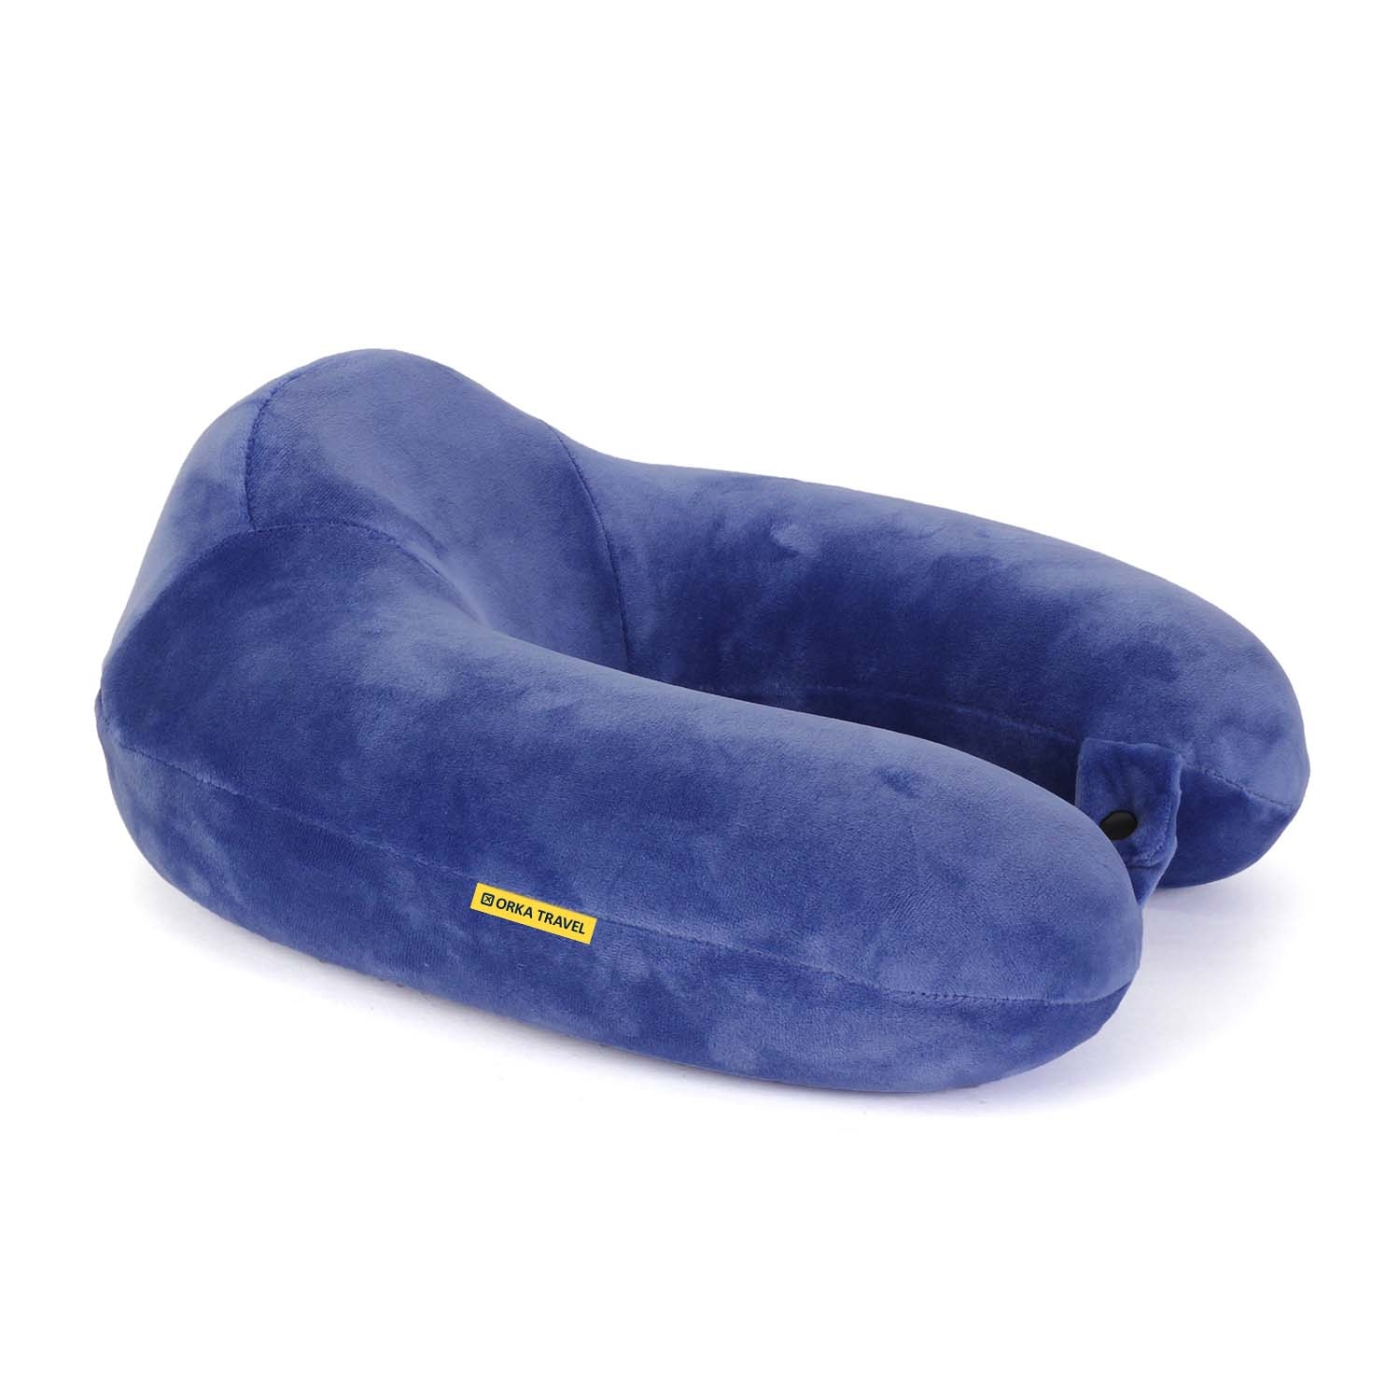 ORKA TRAVEL Solid Special Thermo Sensitive Memory Foam U Shaped Travel Neck Pillow - Blue  